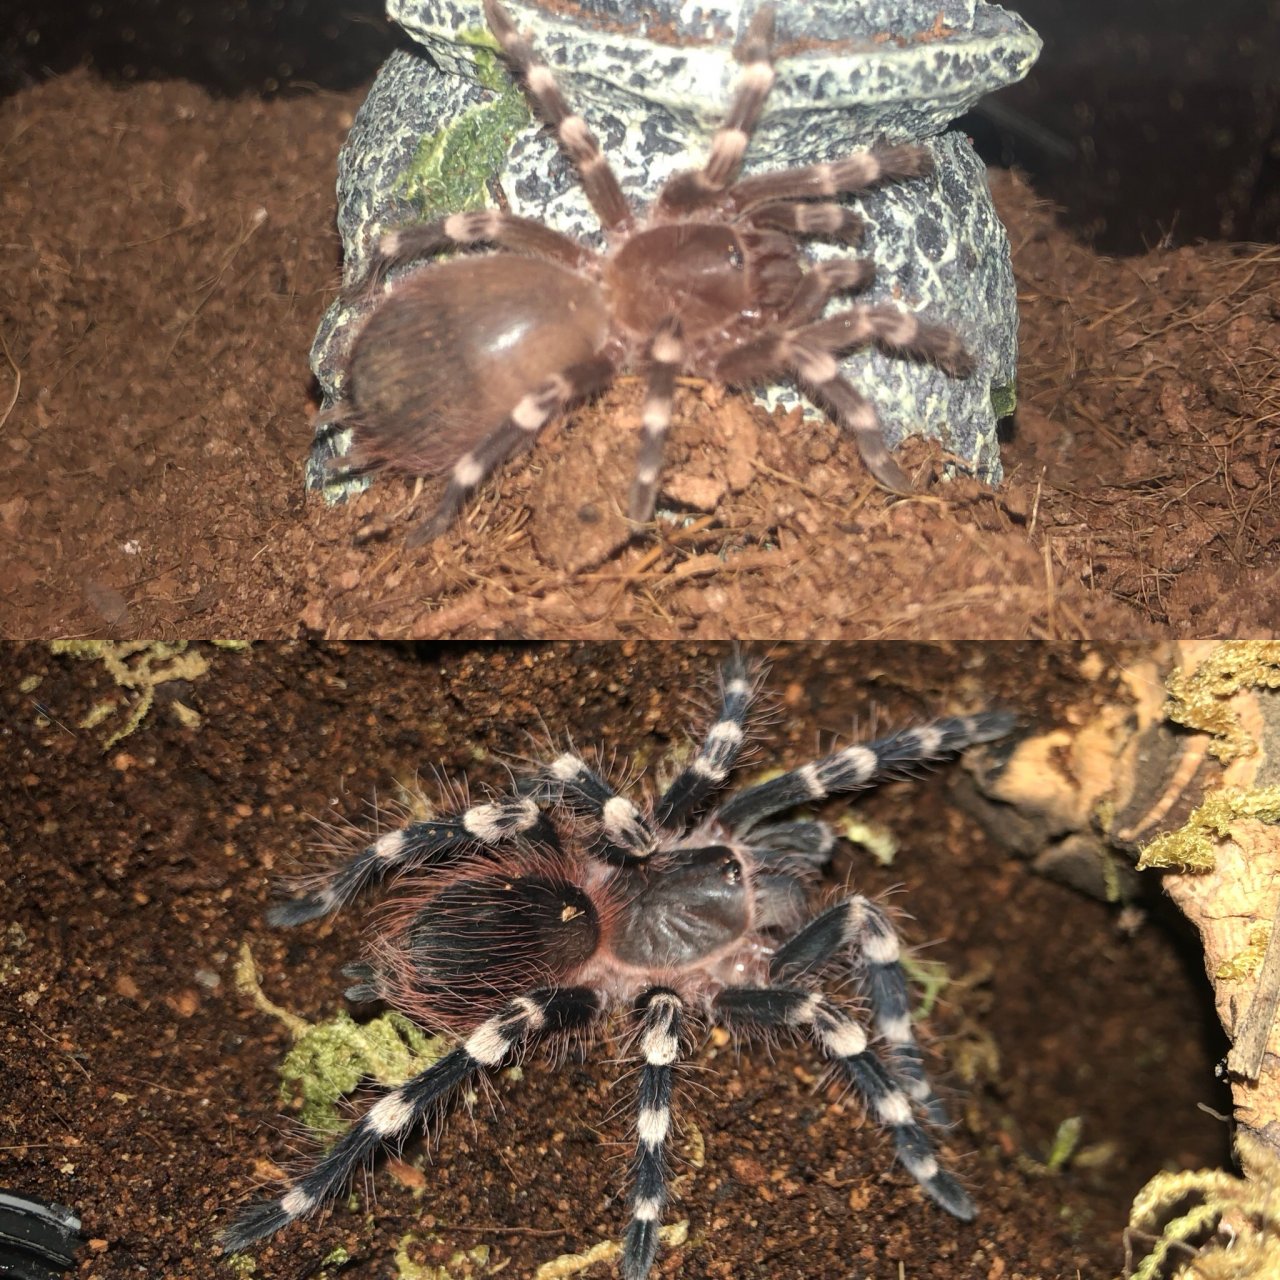 Before and after molt/rehouse - huge difference